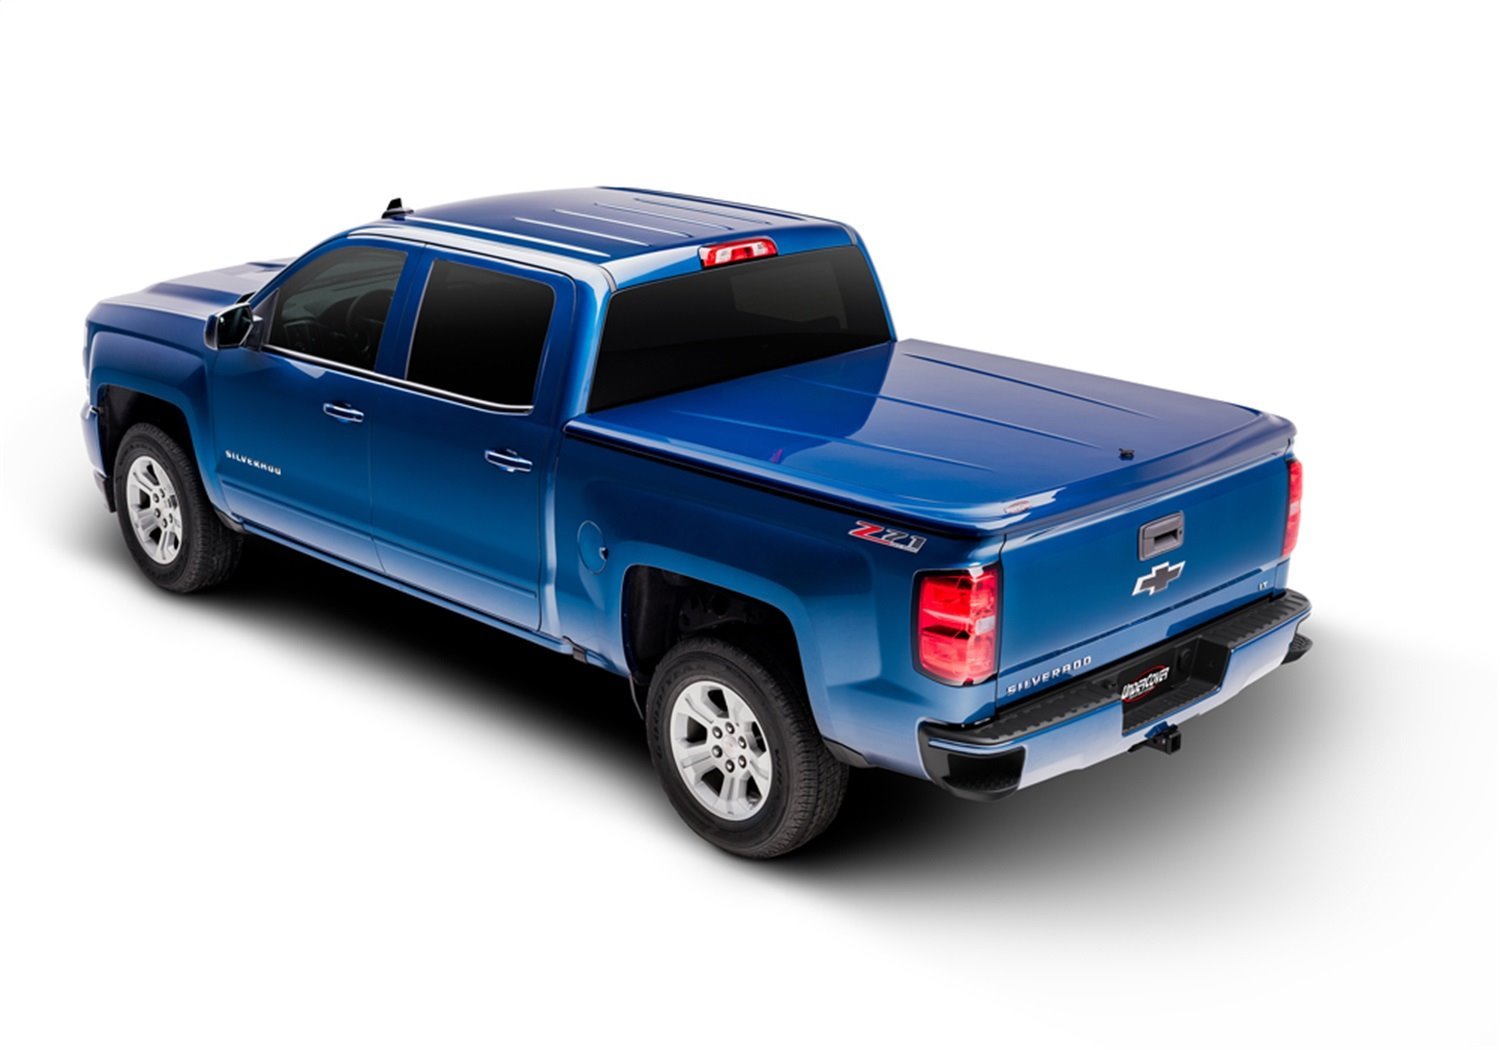 UC2206L-A3 LUX Hard Non-Folding Cover, Fits Select Ford F-150 5'7" Bed Crew (Includes Lightning) A3 Space White